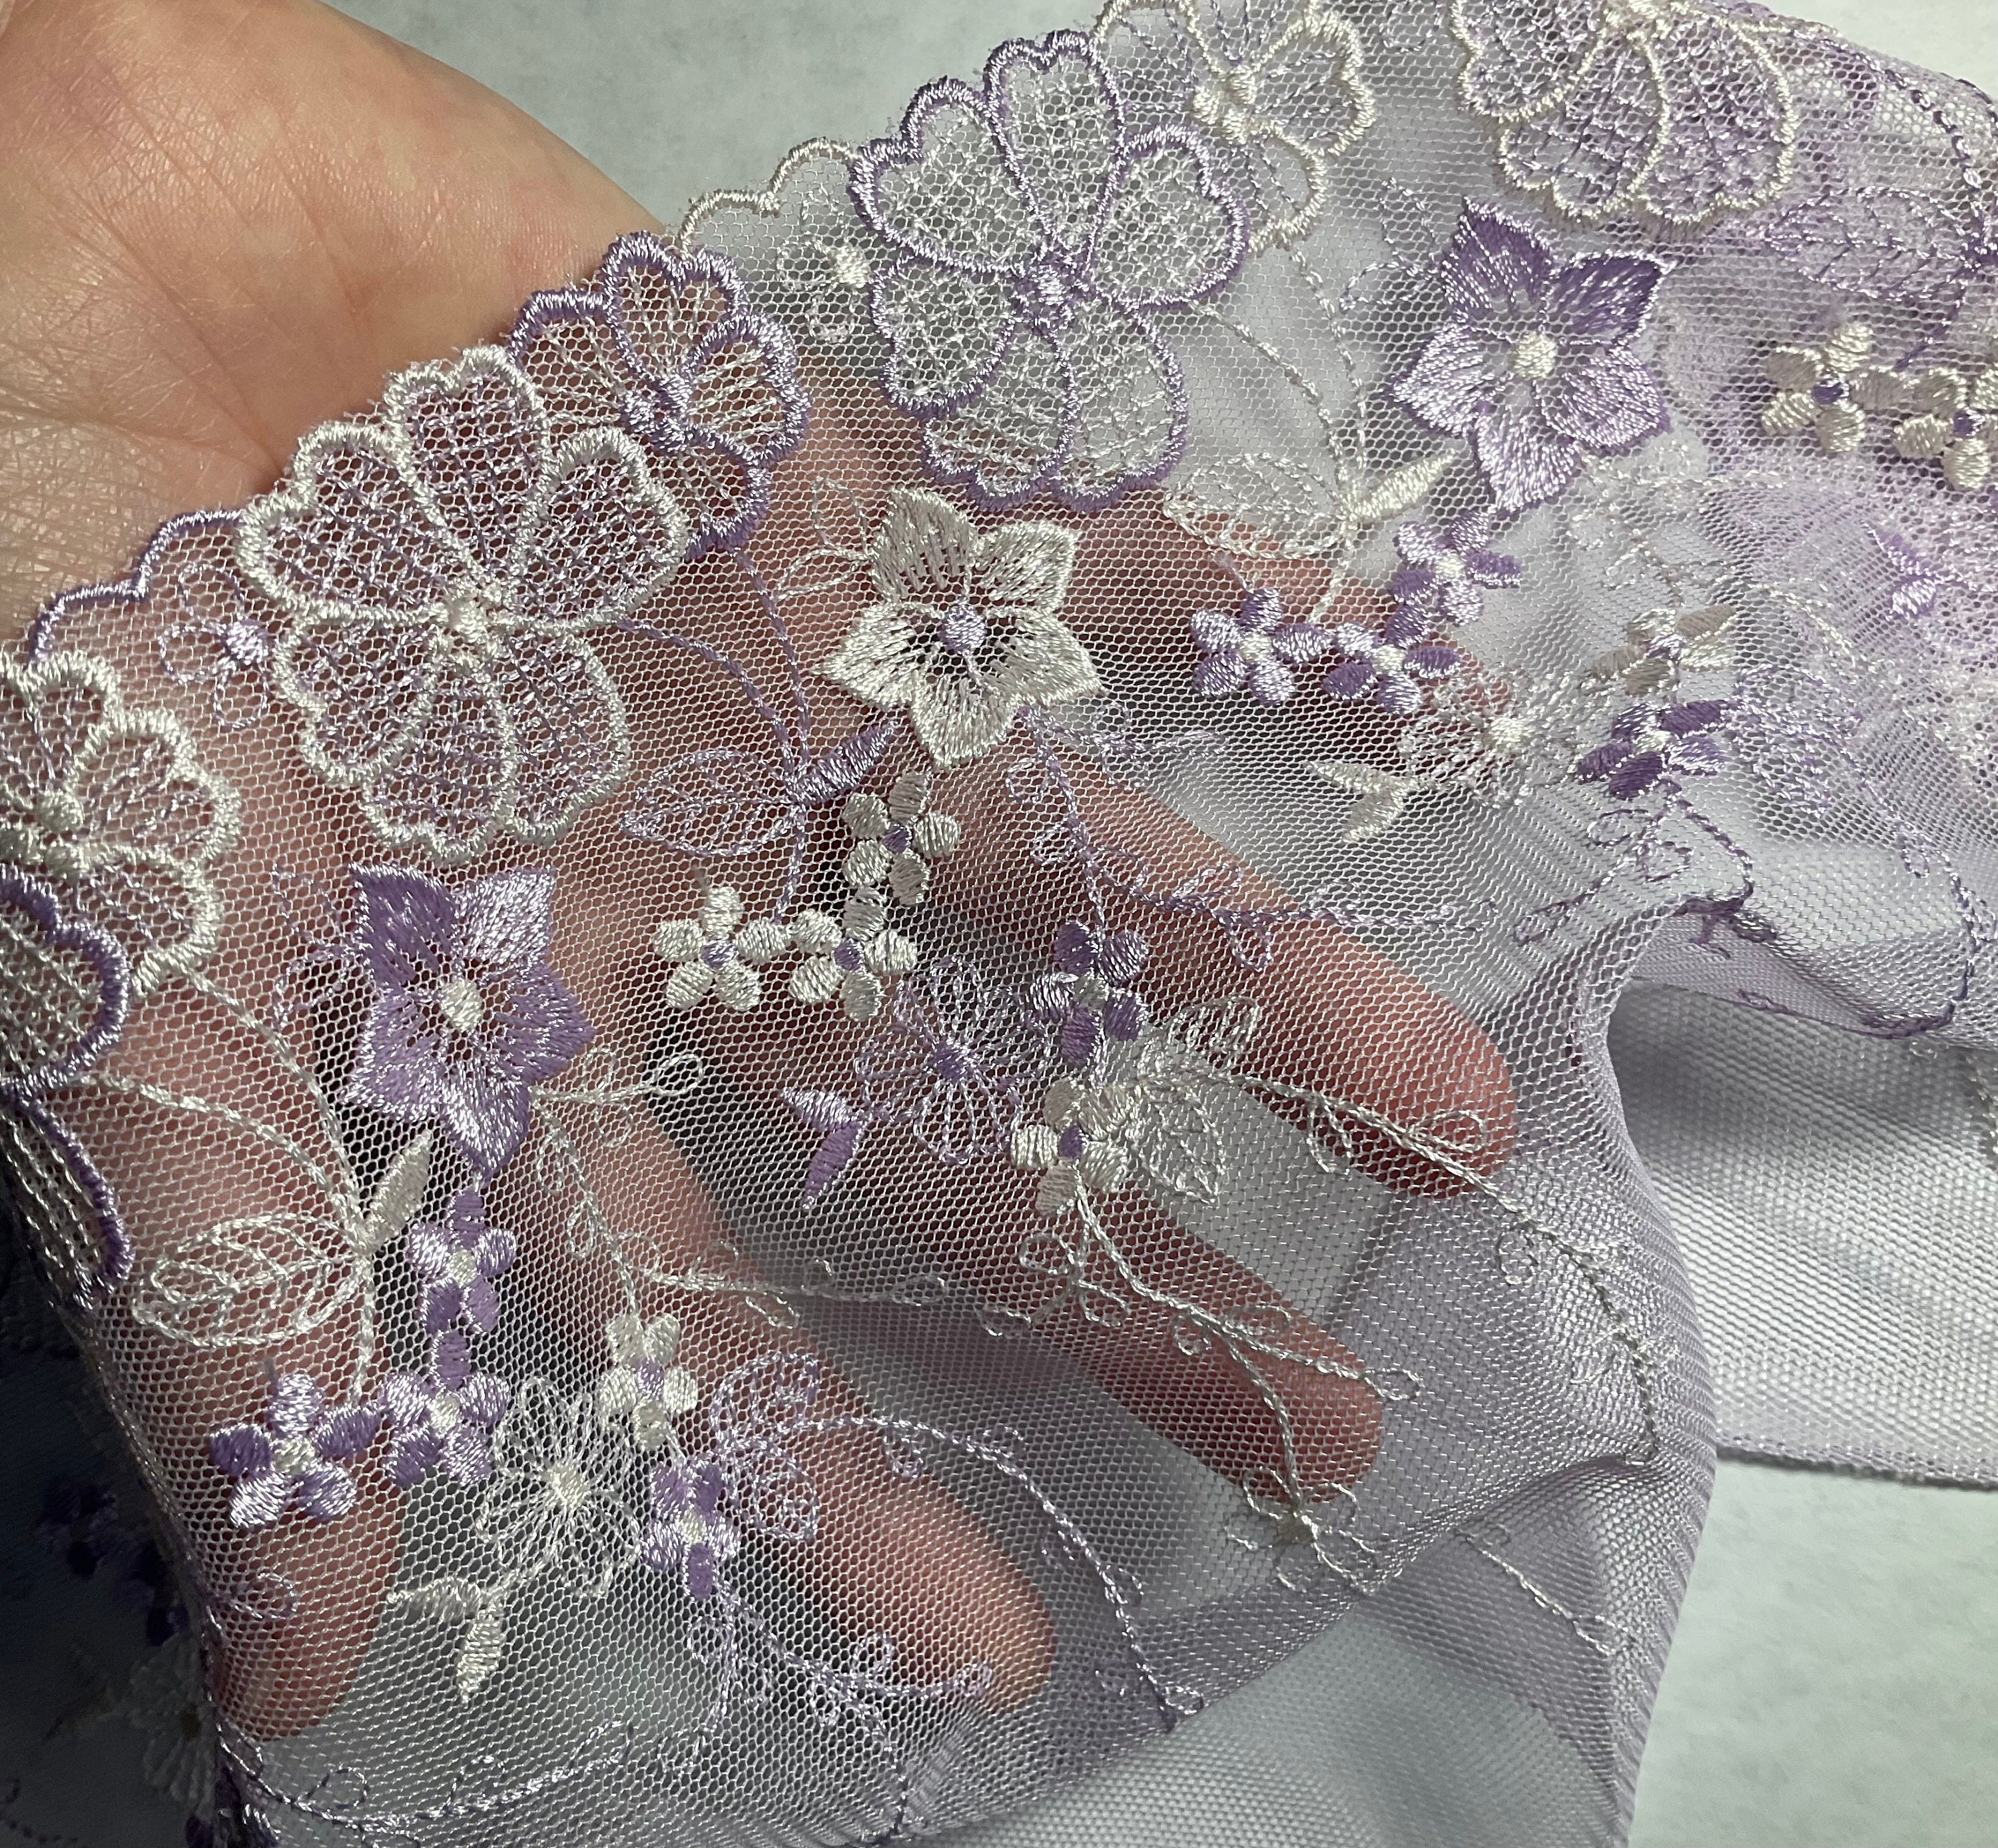 Plum Purple Embroidered Lace Wide for Lingerie, Garments CL 6077